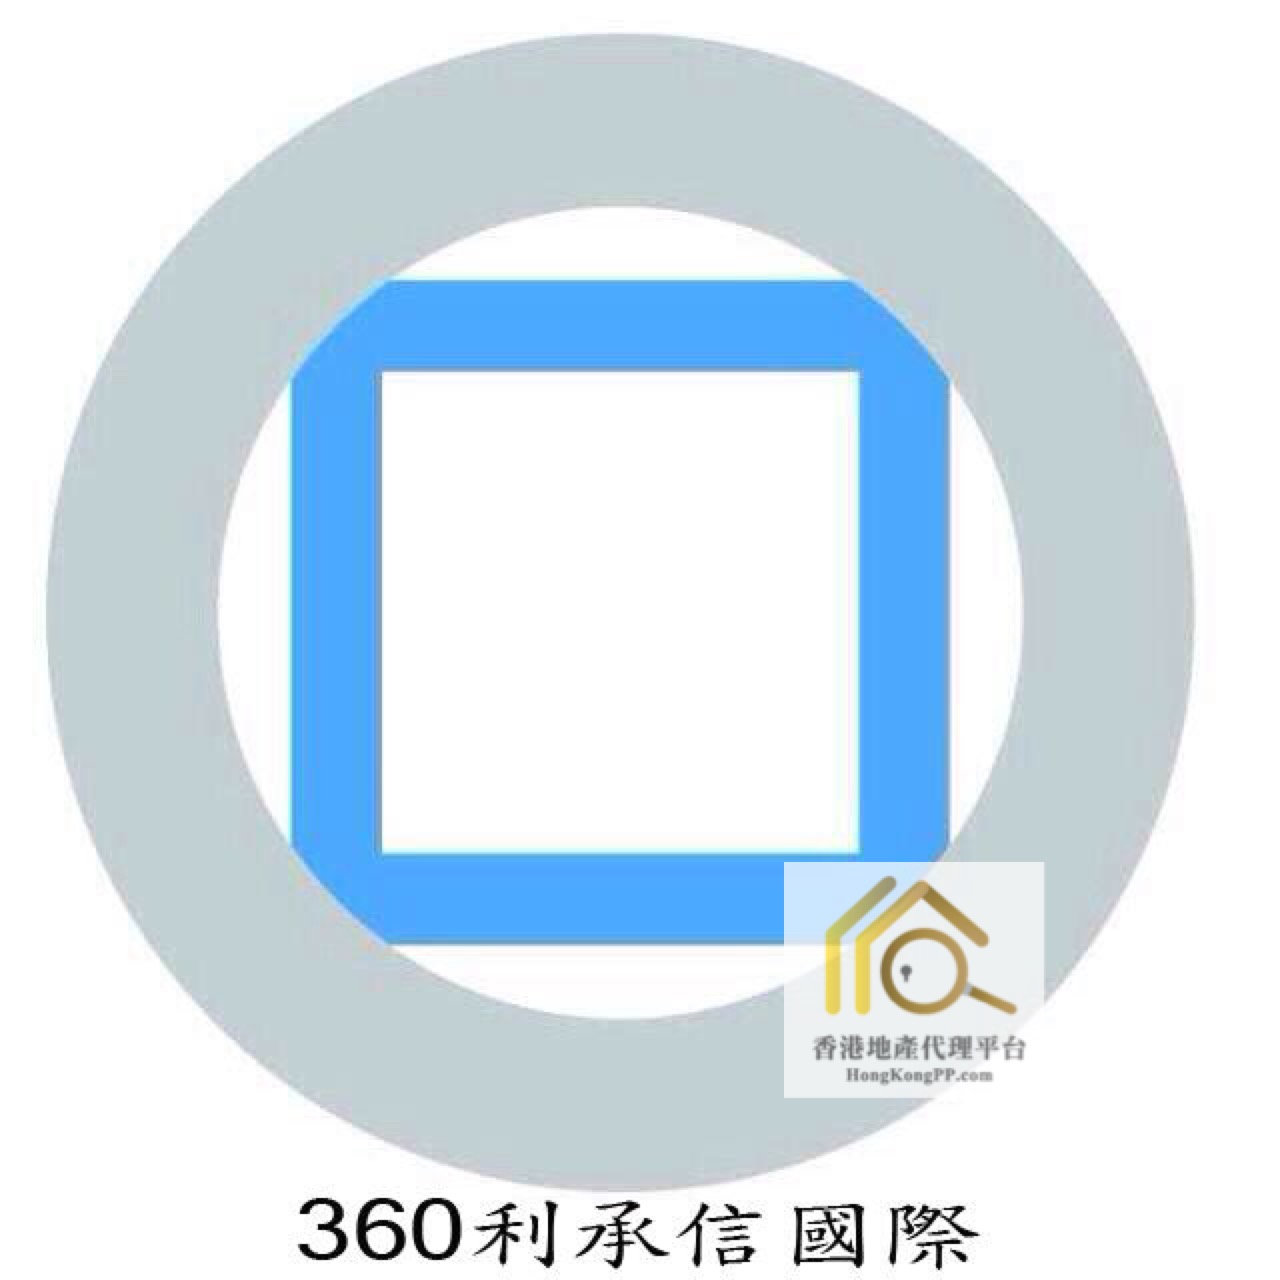 Village HouseEstate Agent: 360 Consultant Limited